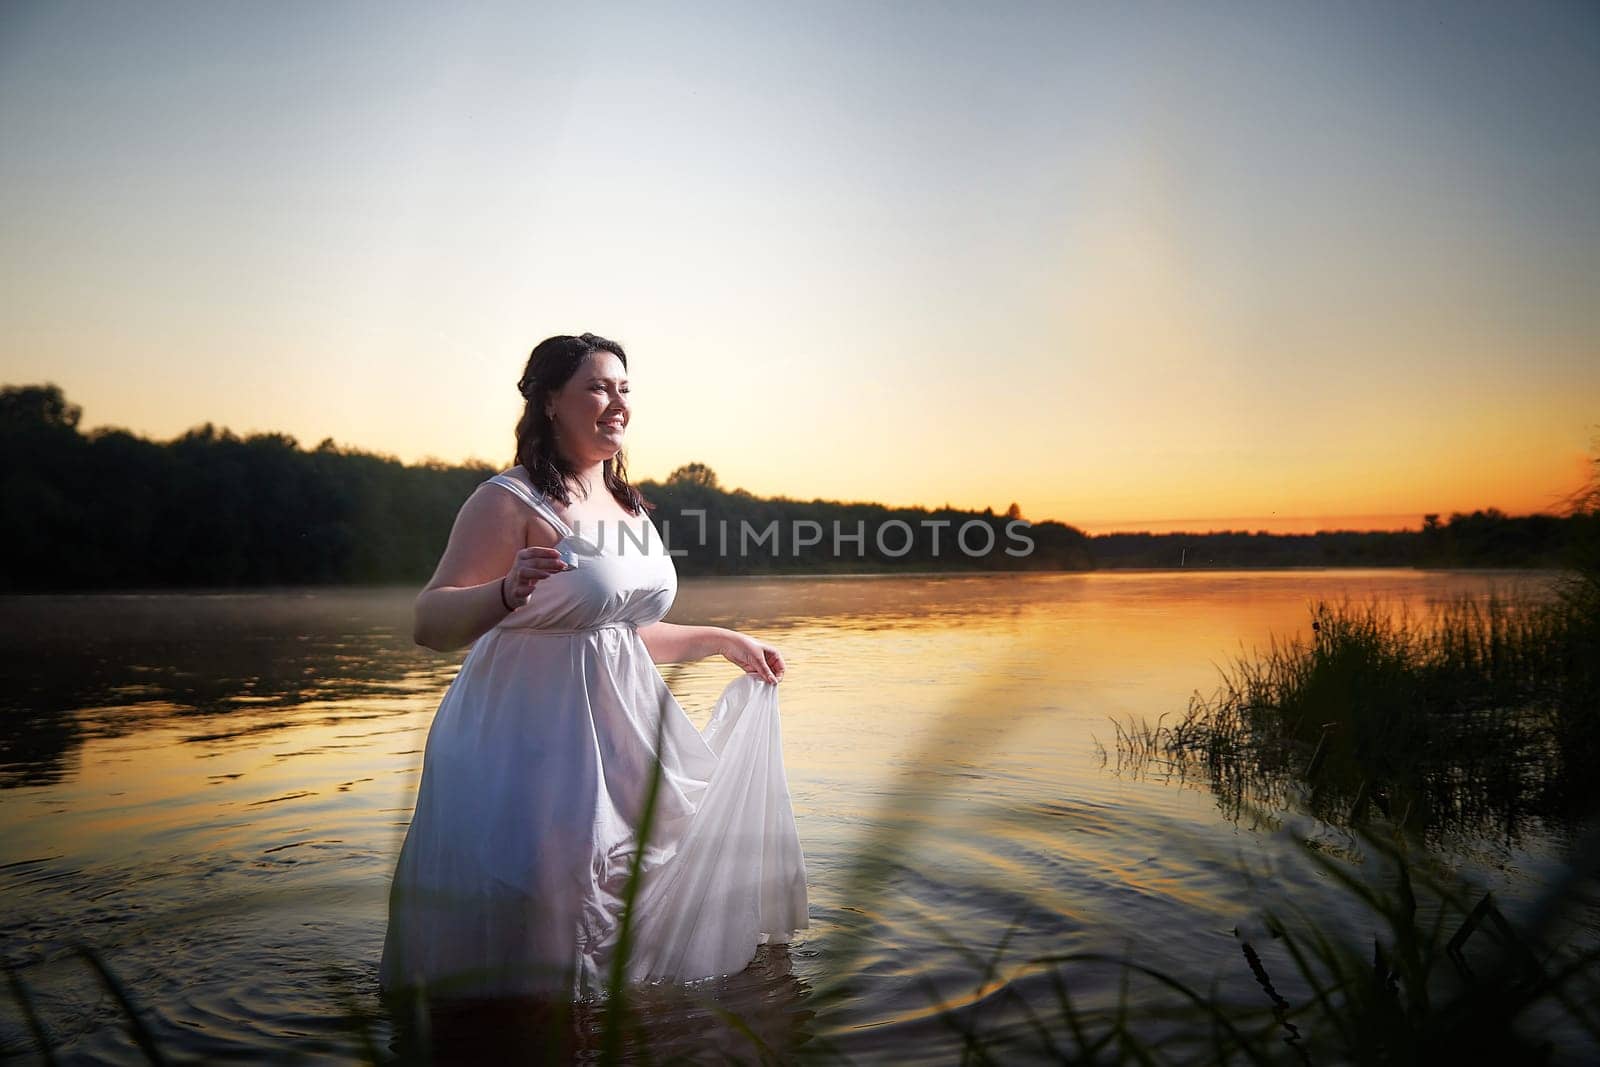 Slavic plump plump chubby girl in long white dress on the feast of Ivan Kupala with flowers and water in a river or lake on a summer evening by keleny